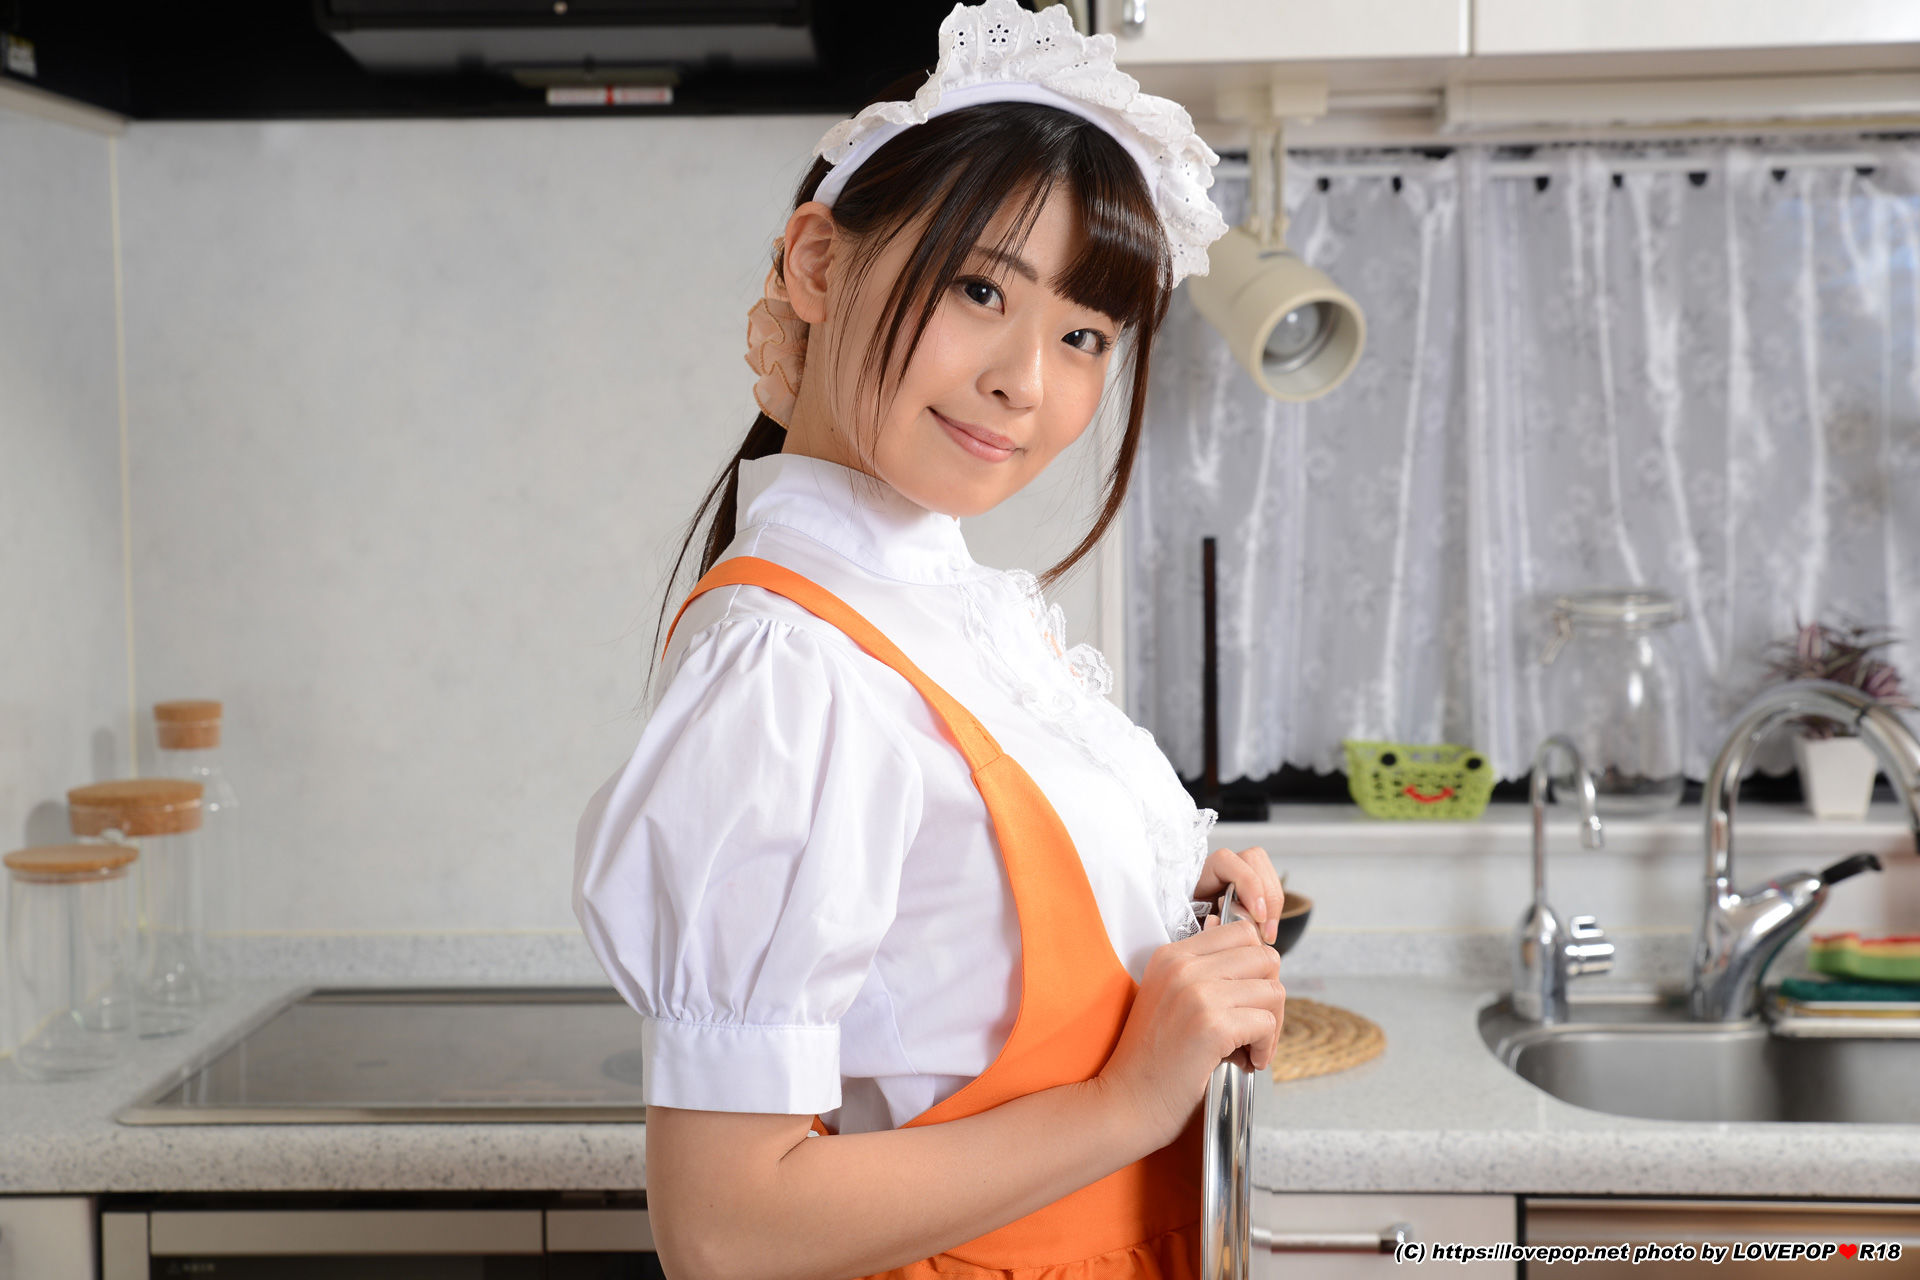 [LOVEPOP] Special Maid Collection - Airi Satou さとう愛理 Photoset 05